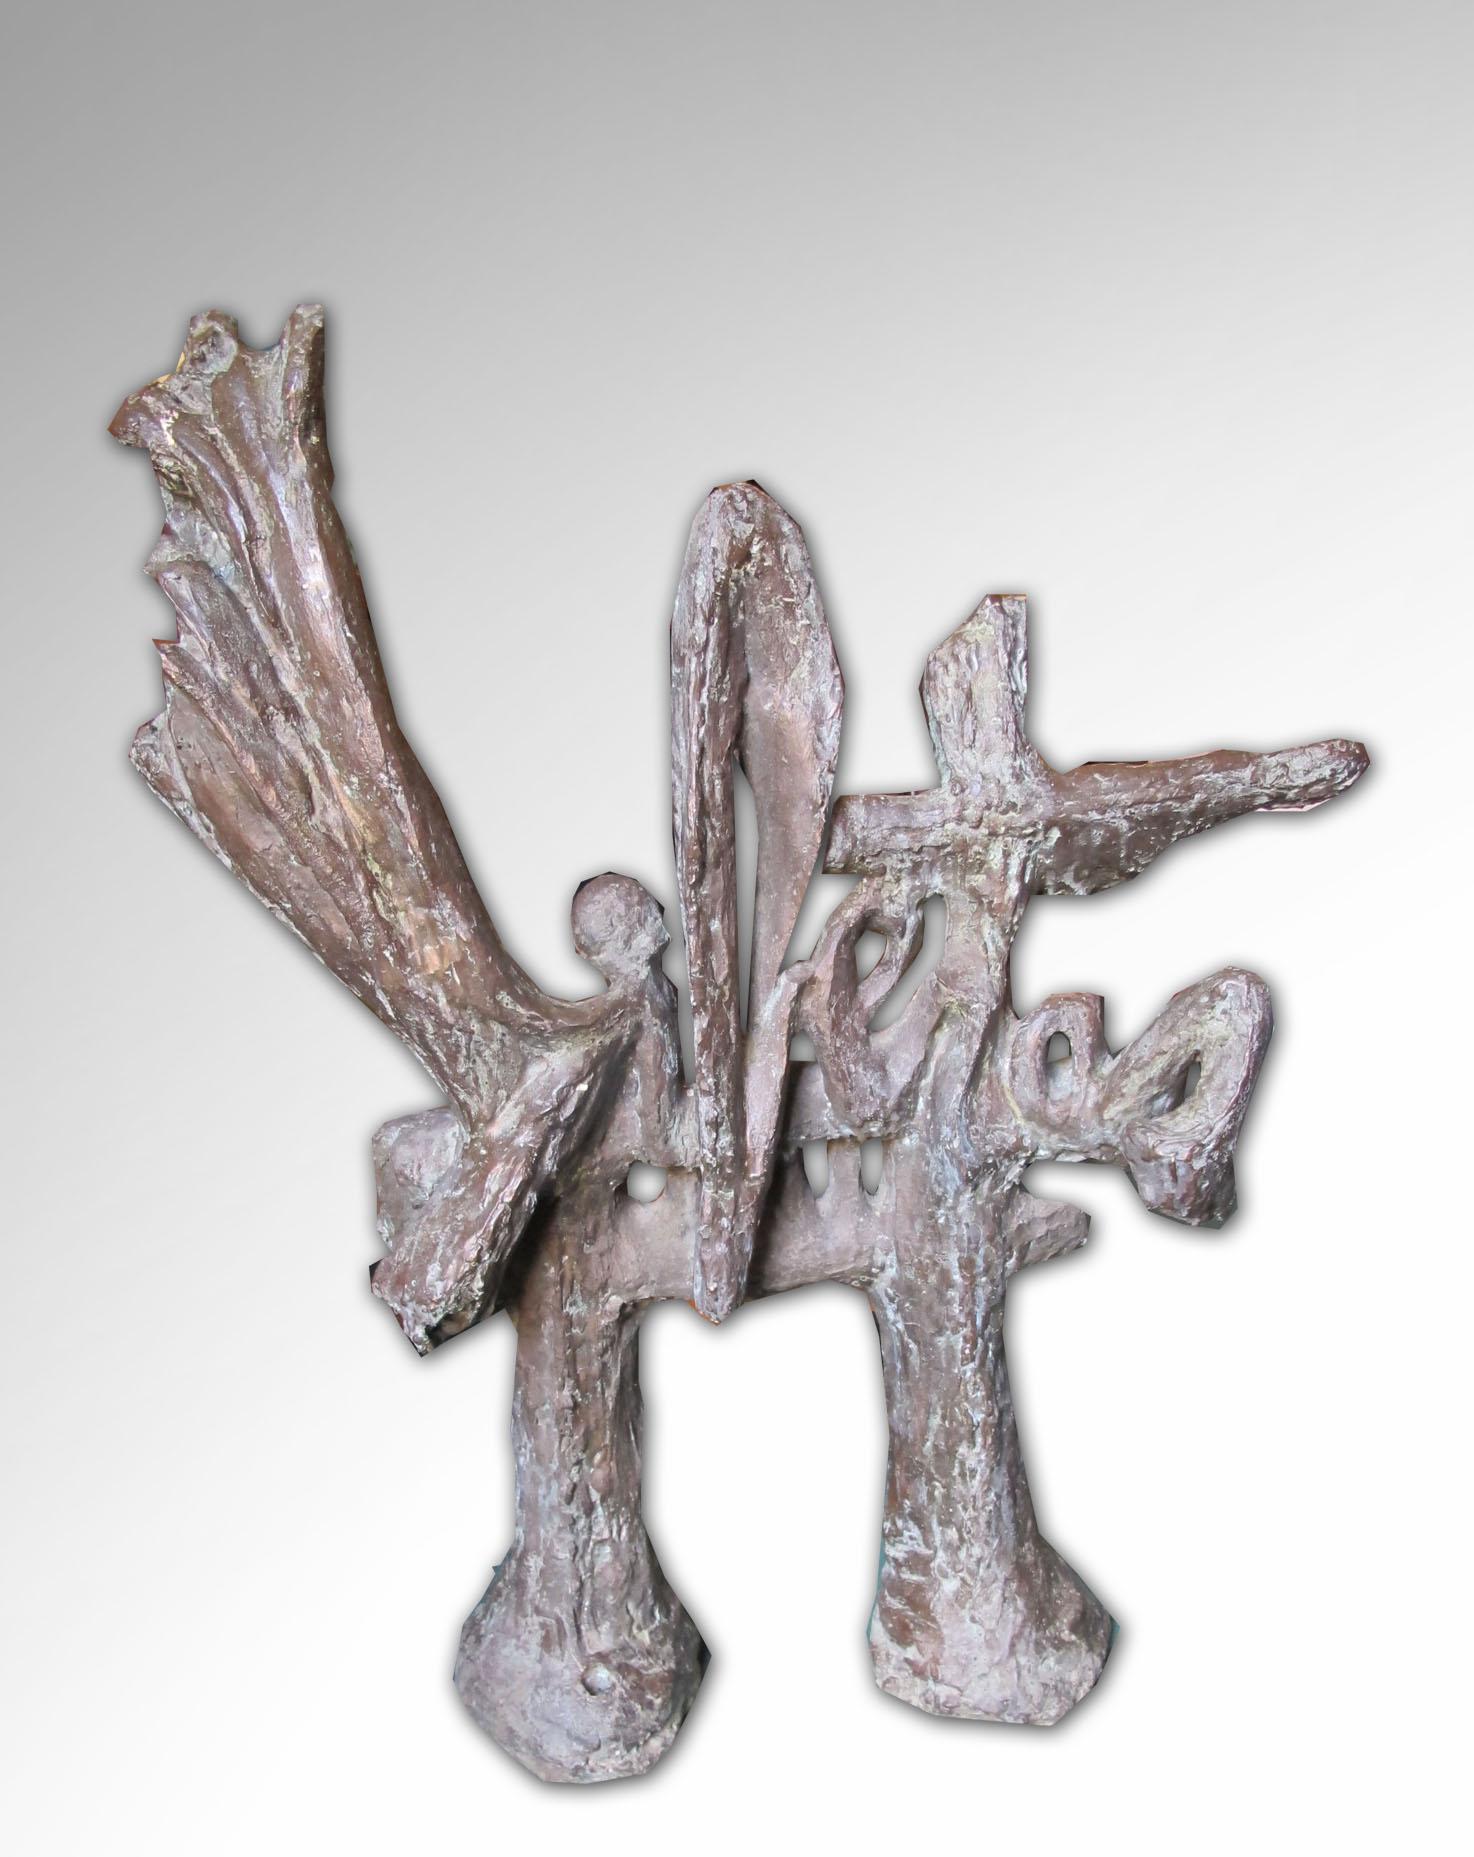 Bronze, Jean Capelli Foundry, 1/8.
On one side reads Europa, another Libertas. The combination of two words sculpture posing interesting problems.
Bibliography : Sculptures, catalogue d’exposition, galerie Thorigny, 1990, page 40.
  